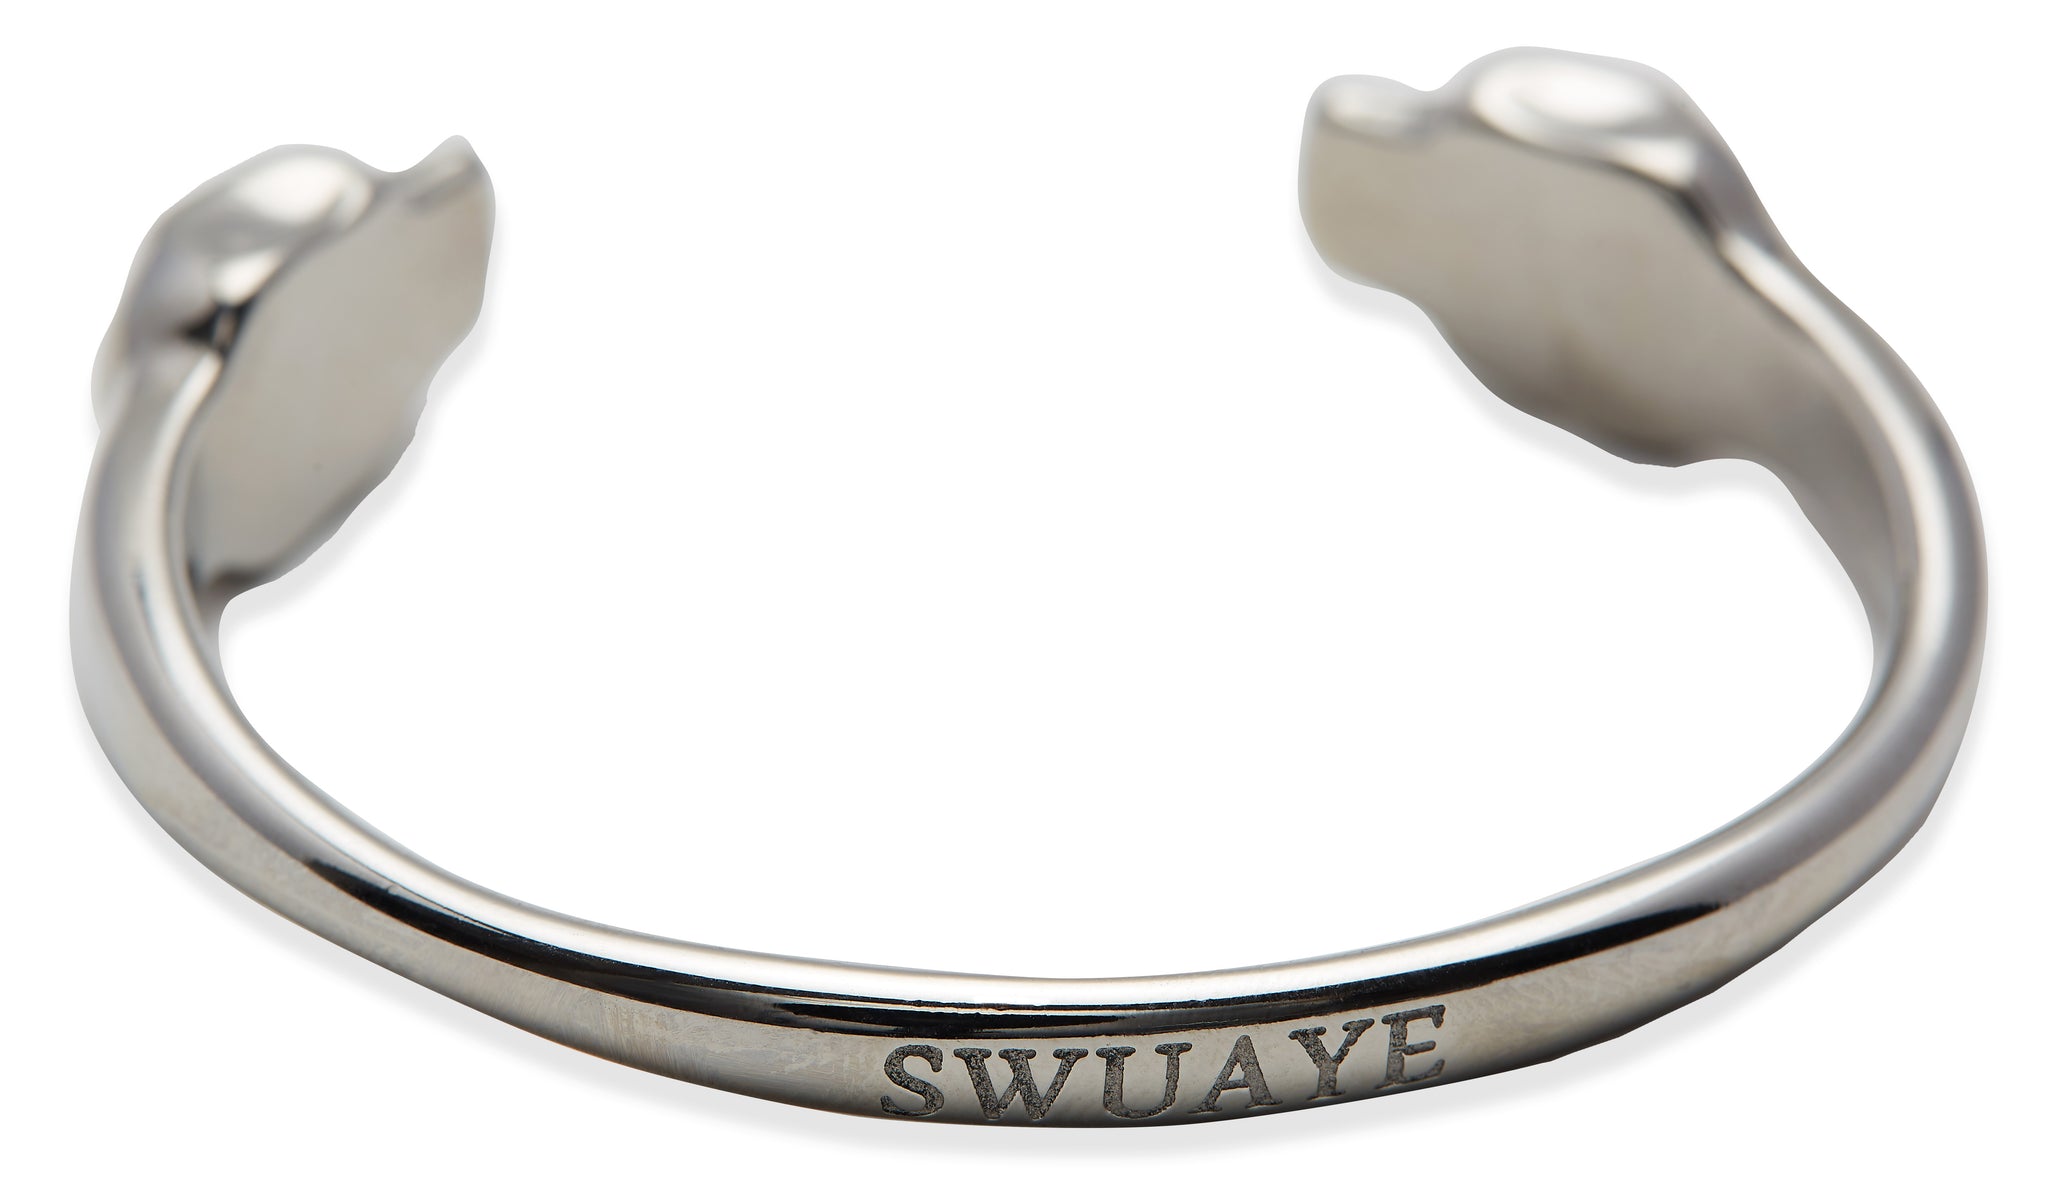 Skull Bangle with Silver Finish